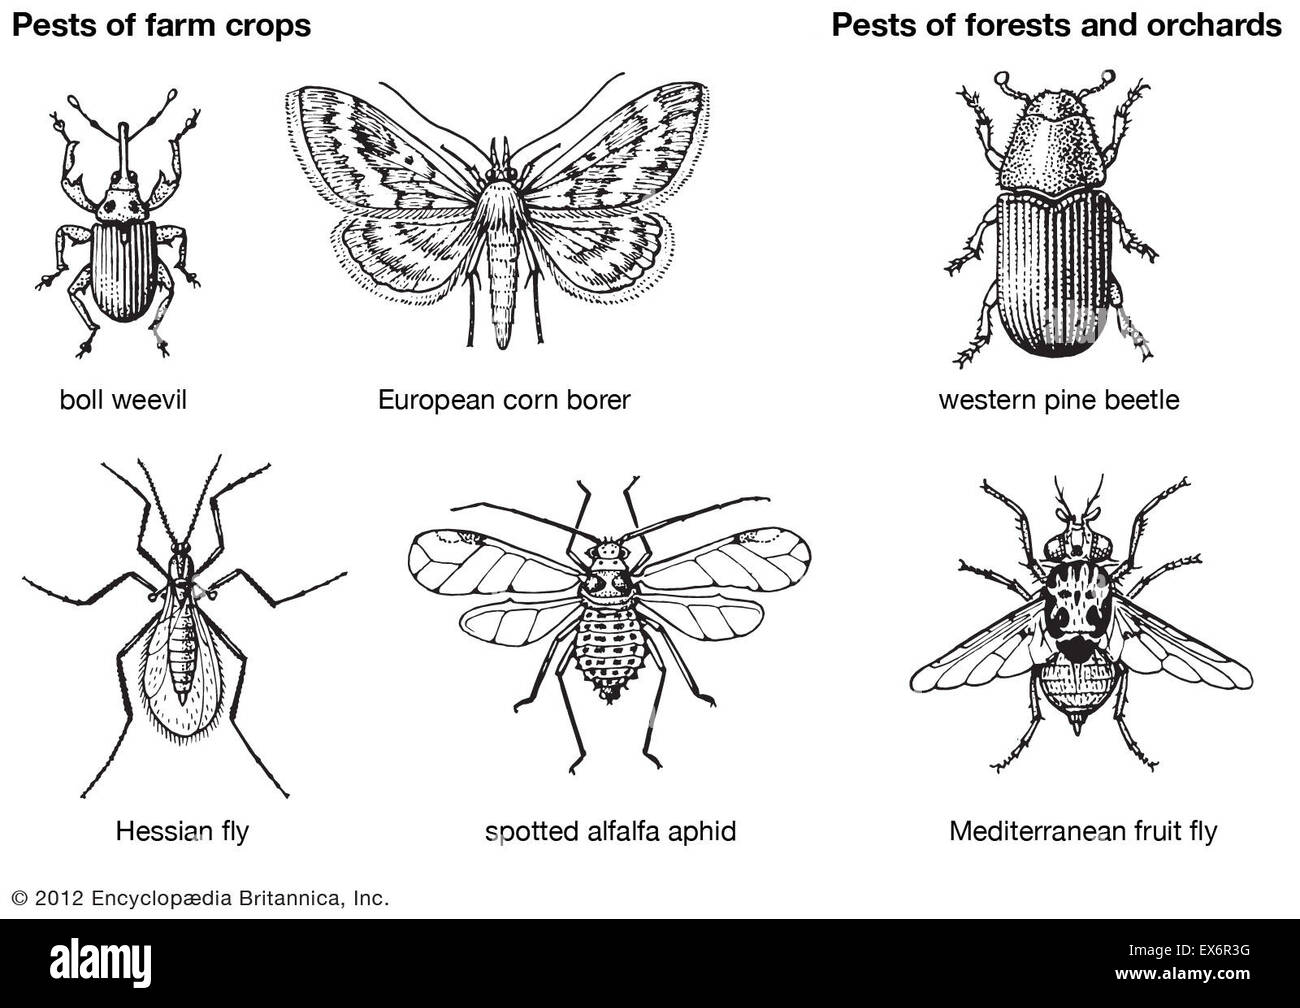 Insect pests of farm crops, forests, and orchards Stock Photo